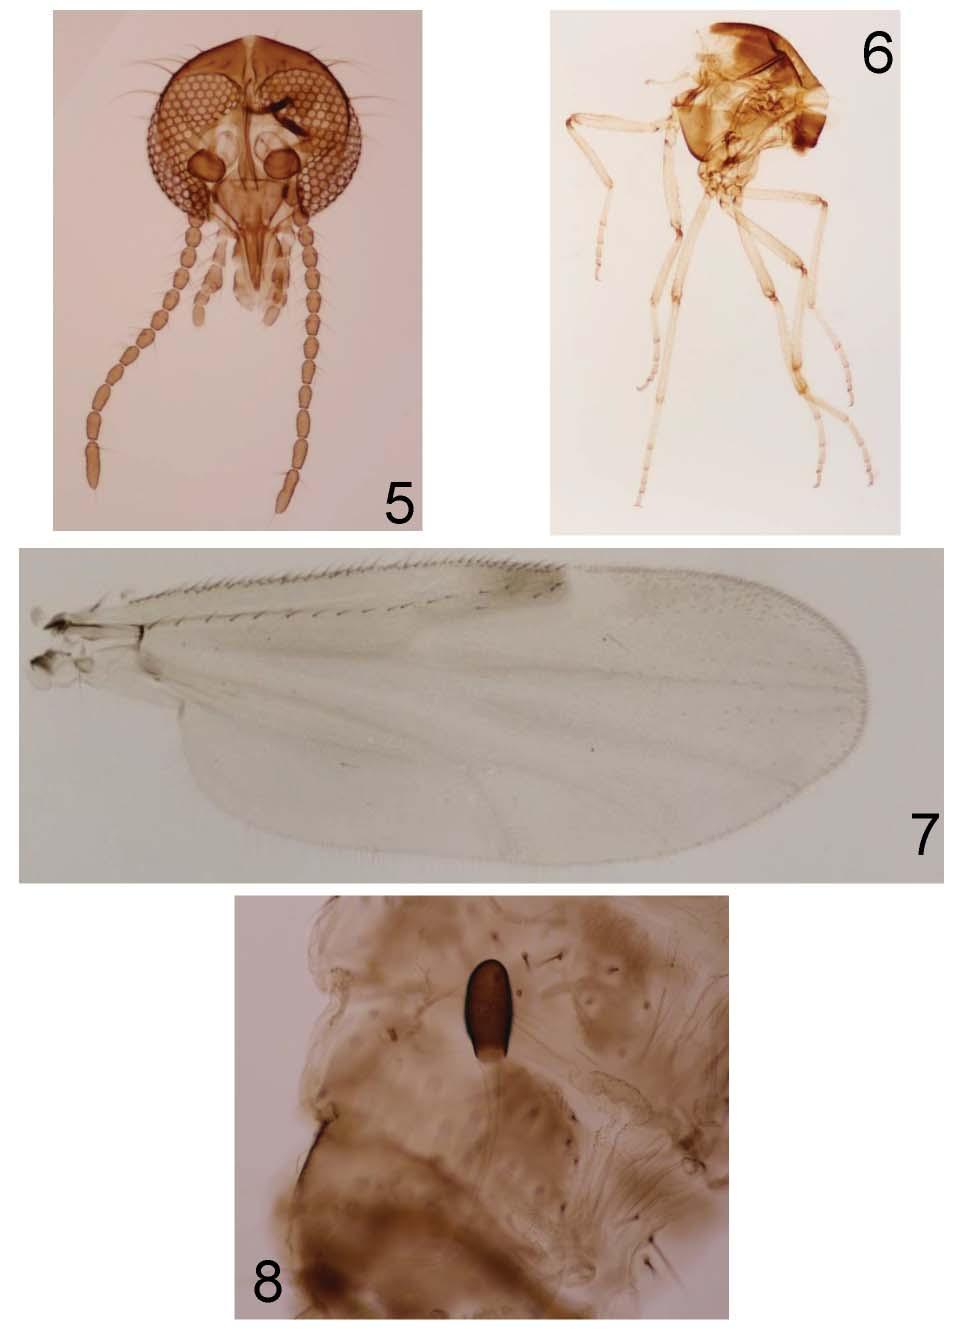 16 INSECTA MUNDI 0441, August 2015 GROGAN AND LYSYK Figures 5 8. Culicoides shemanchuki n. sp.